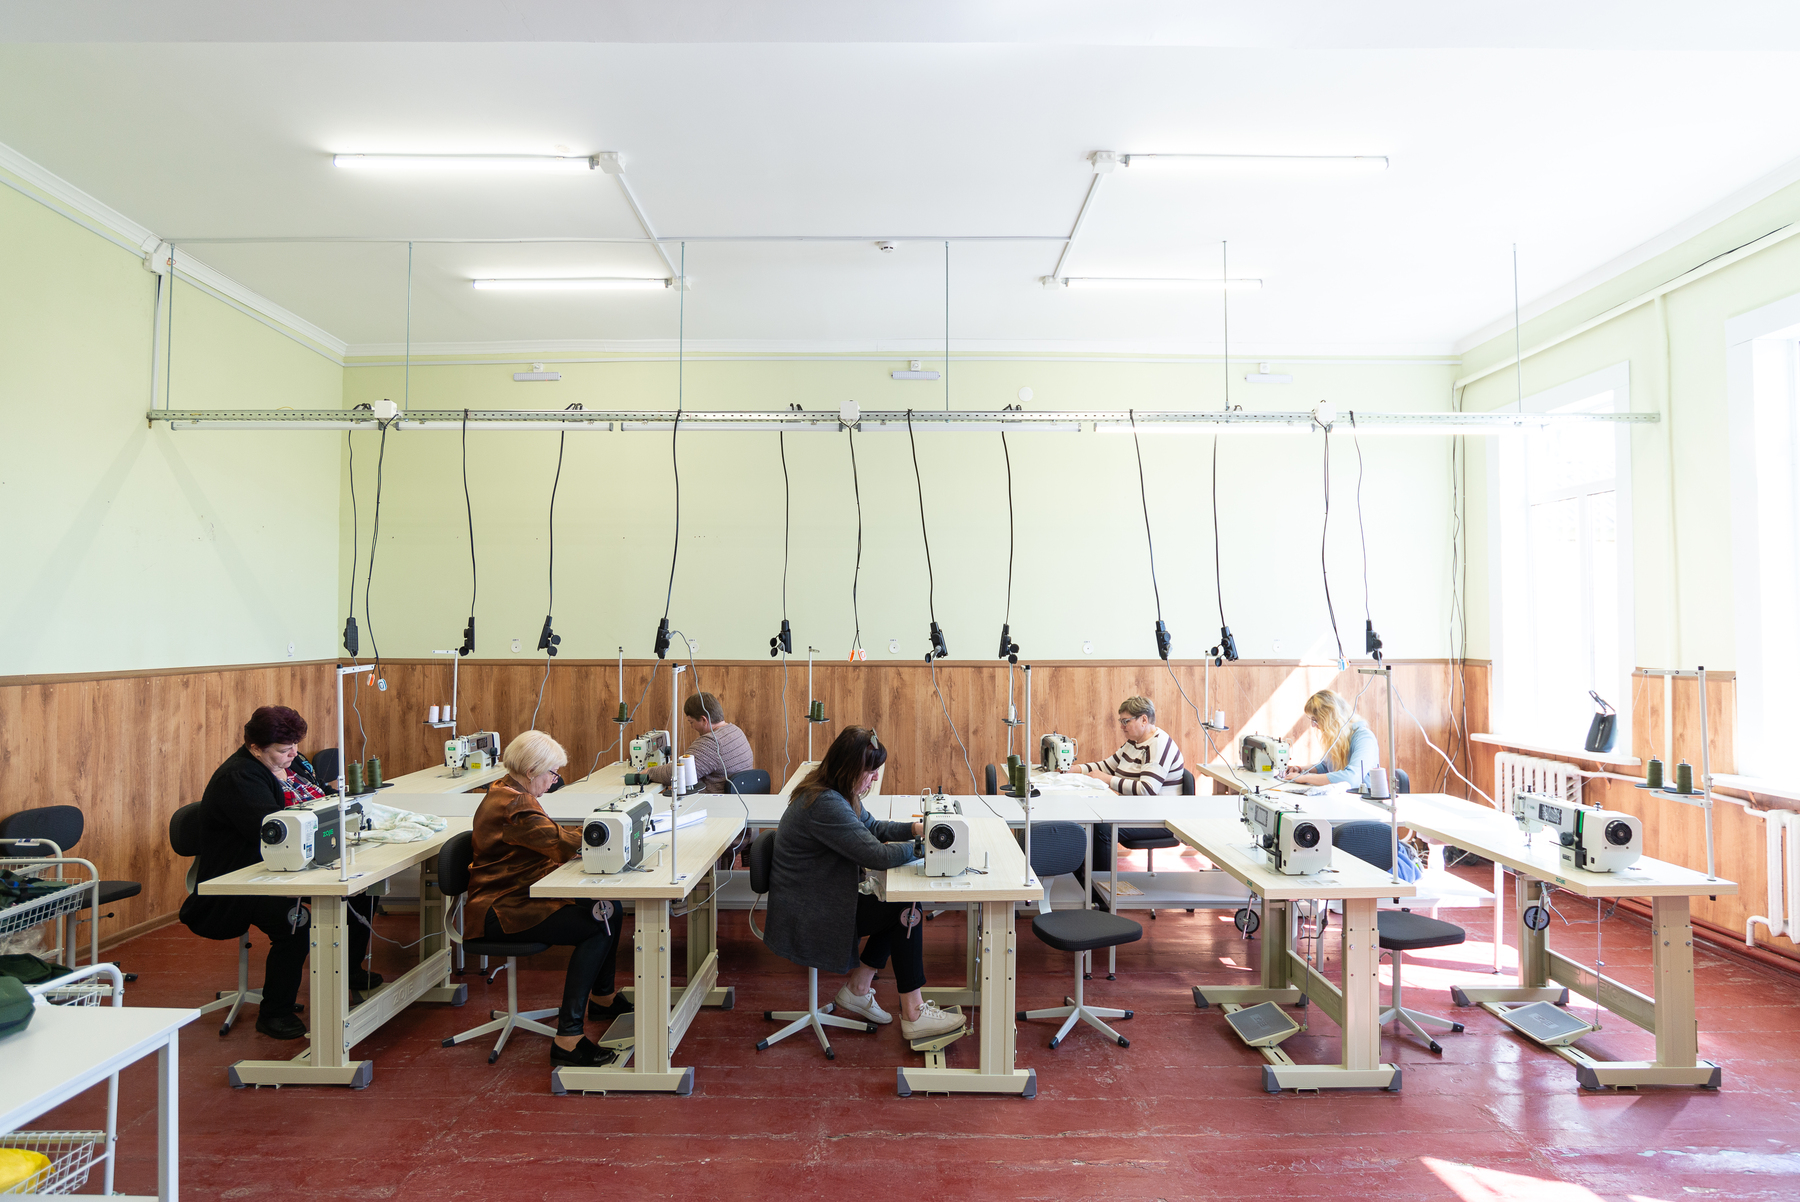 Women working in a newly opened clothing workshop in the city of Nizhyn